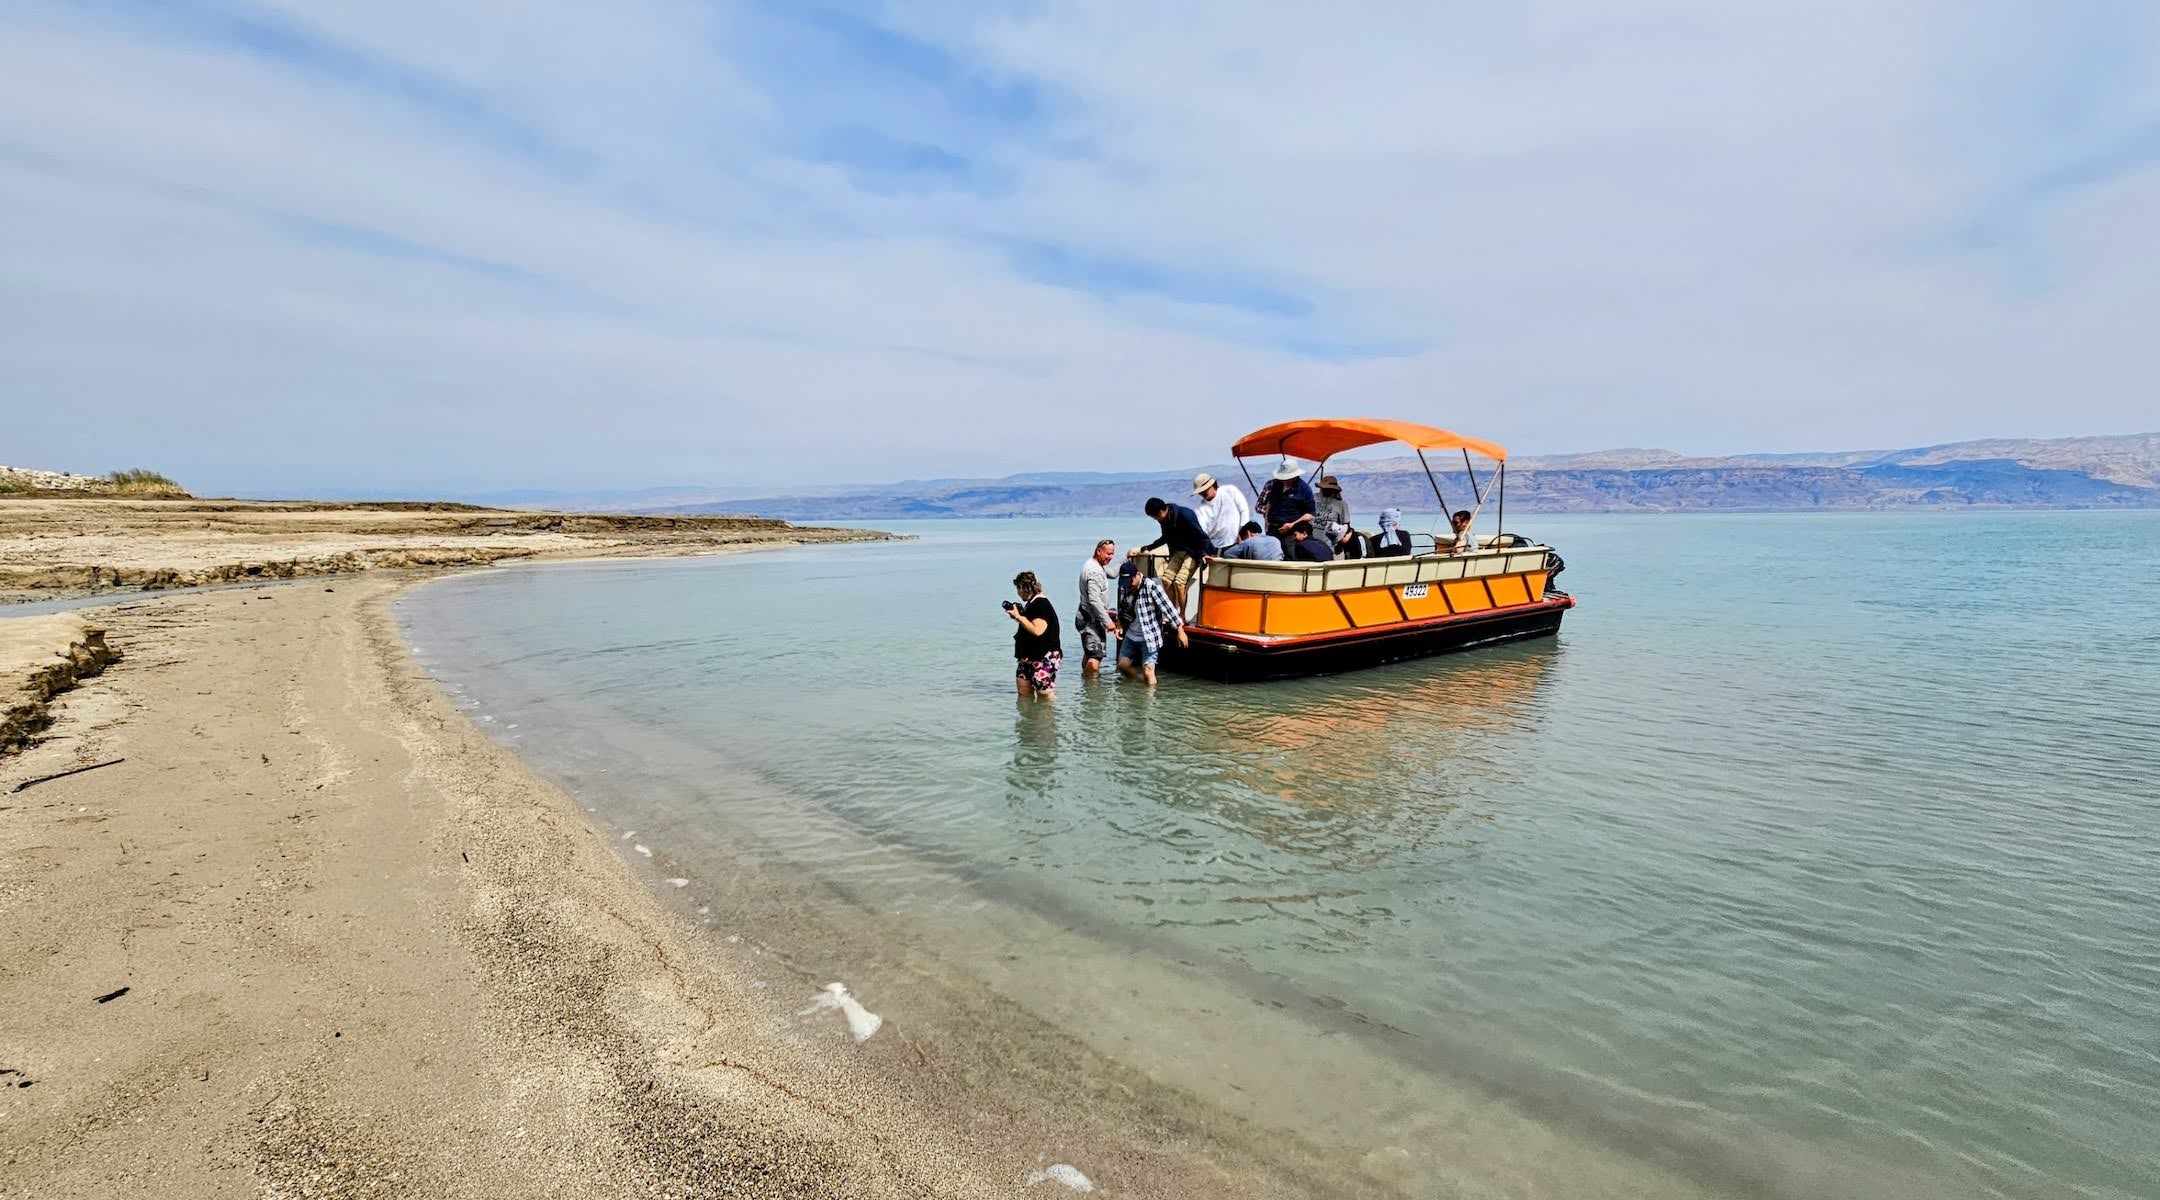 Passengers wade into the waters of the Dead Sea from Noam Bedein's boat on a recent excursion. (Noam Bedein)